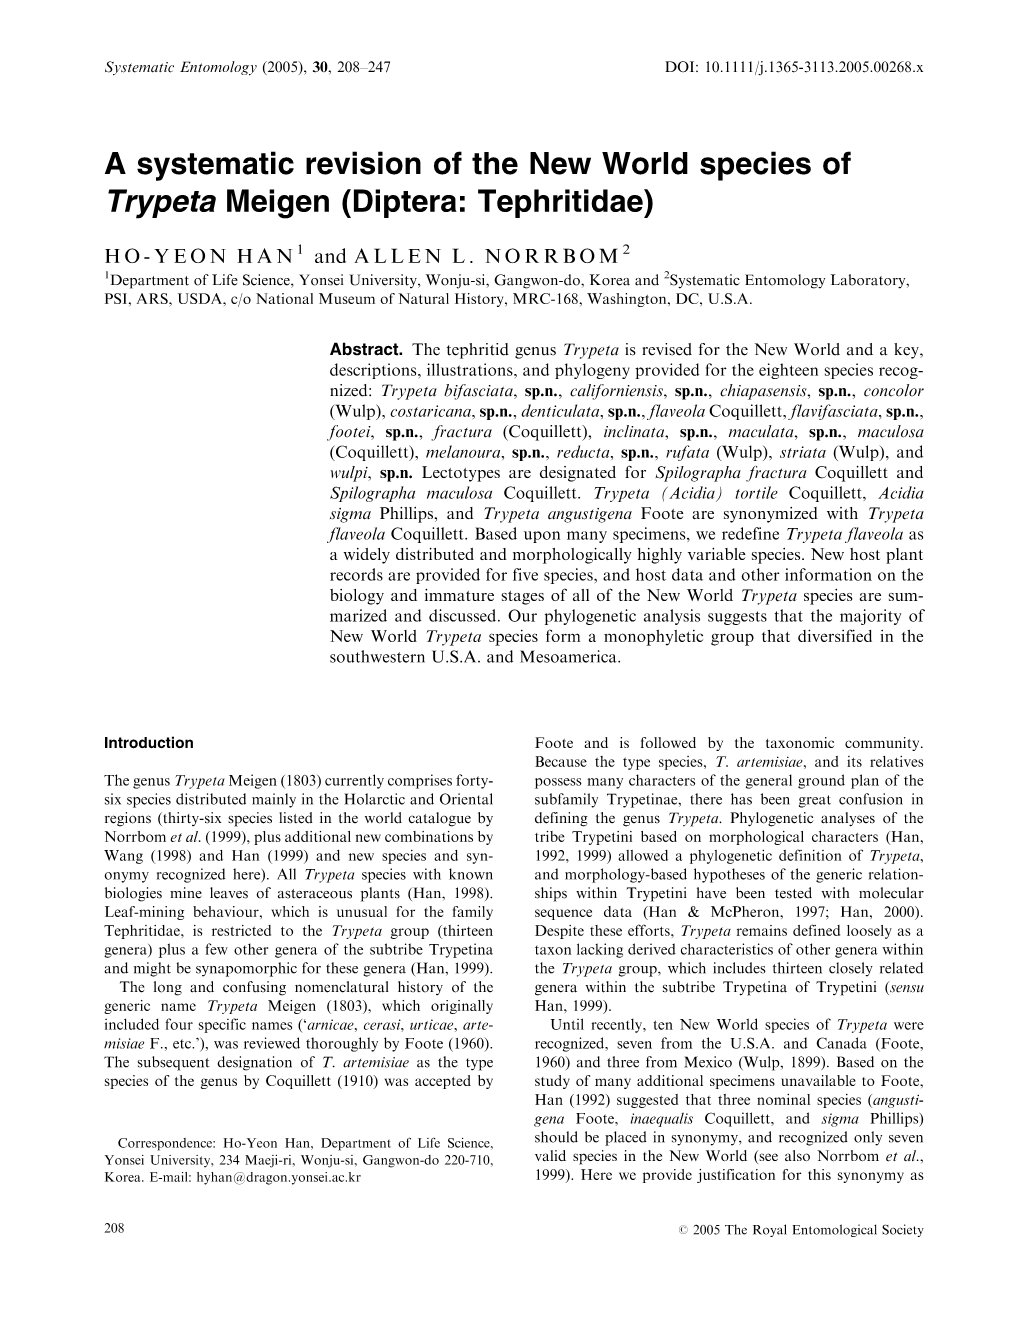 A Systematic Revision of the New World Species of Trypeta Meigen (Diptera: Tephritidae)